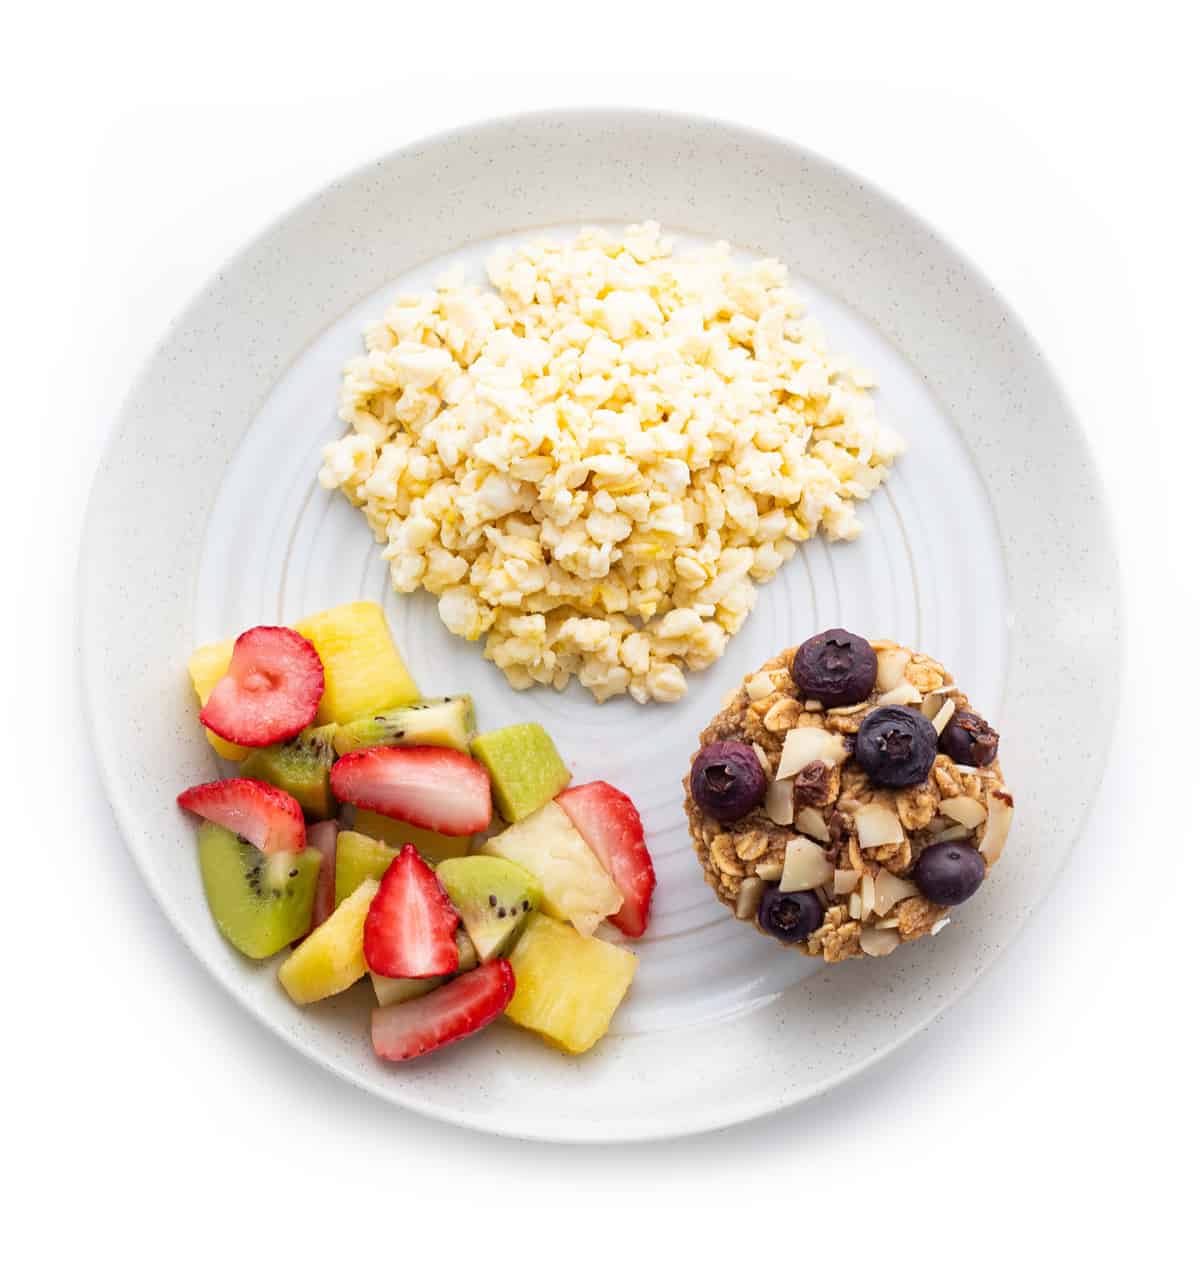 Scrambled eggs with oatmeal muffin and fruit salad on a plate